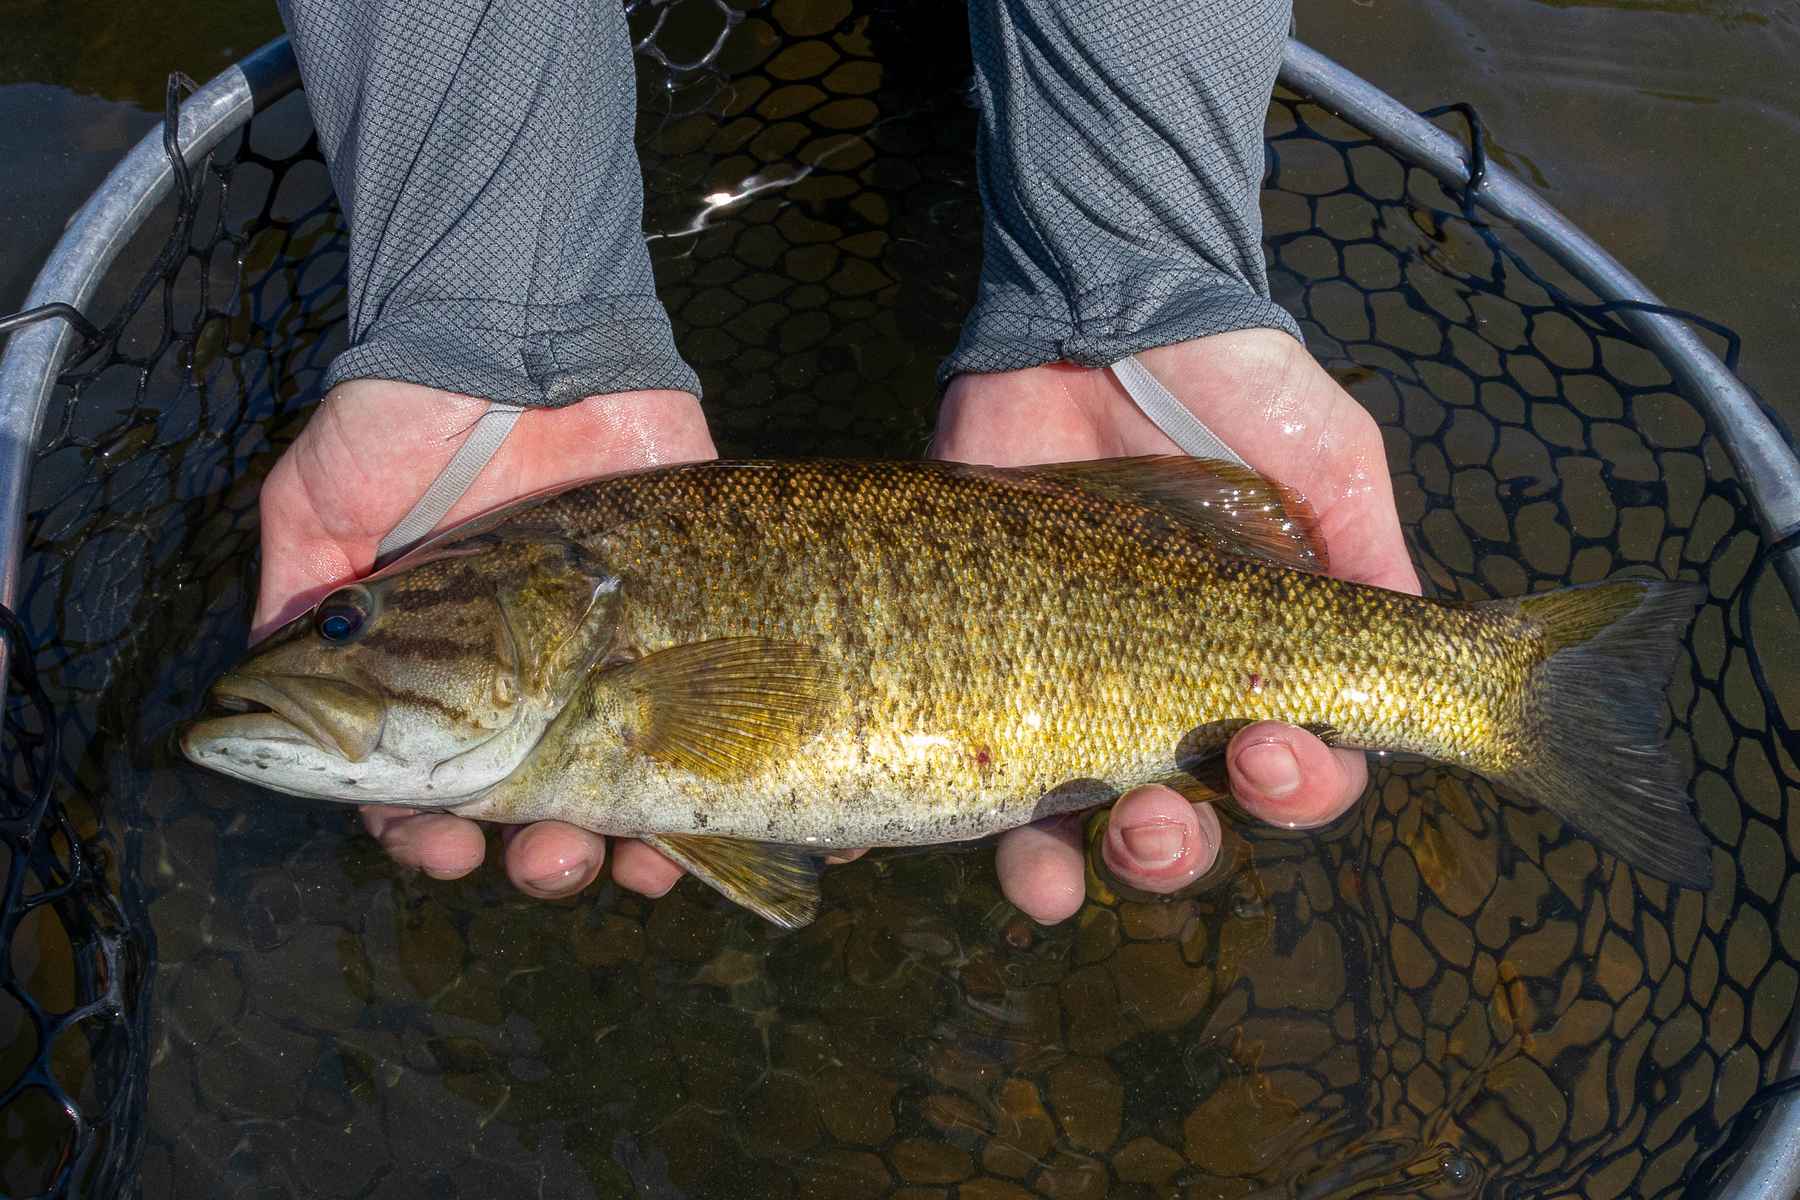 Southern smallies: The genetically unique smallmouth bass of